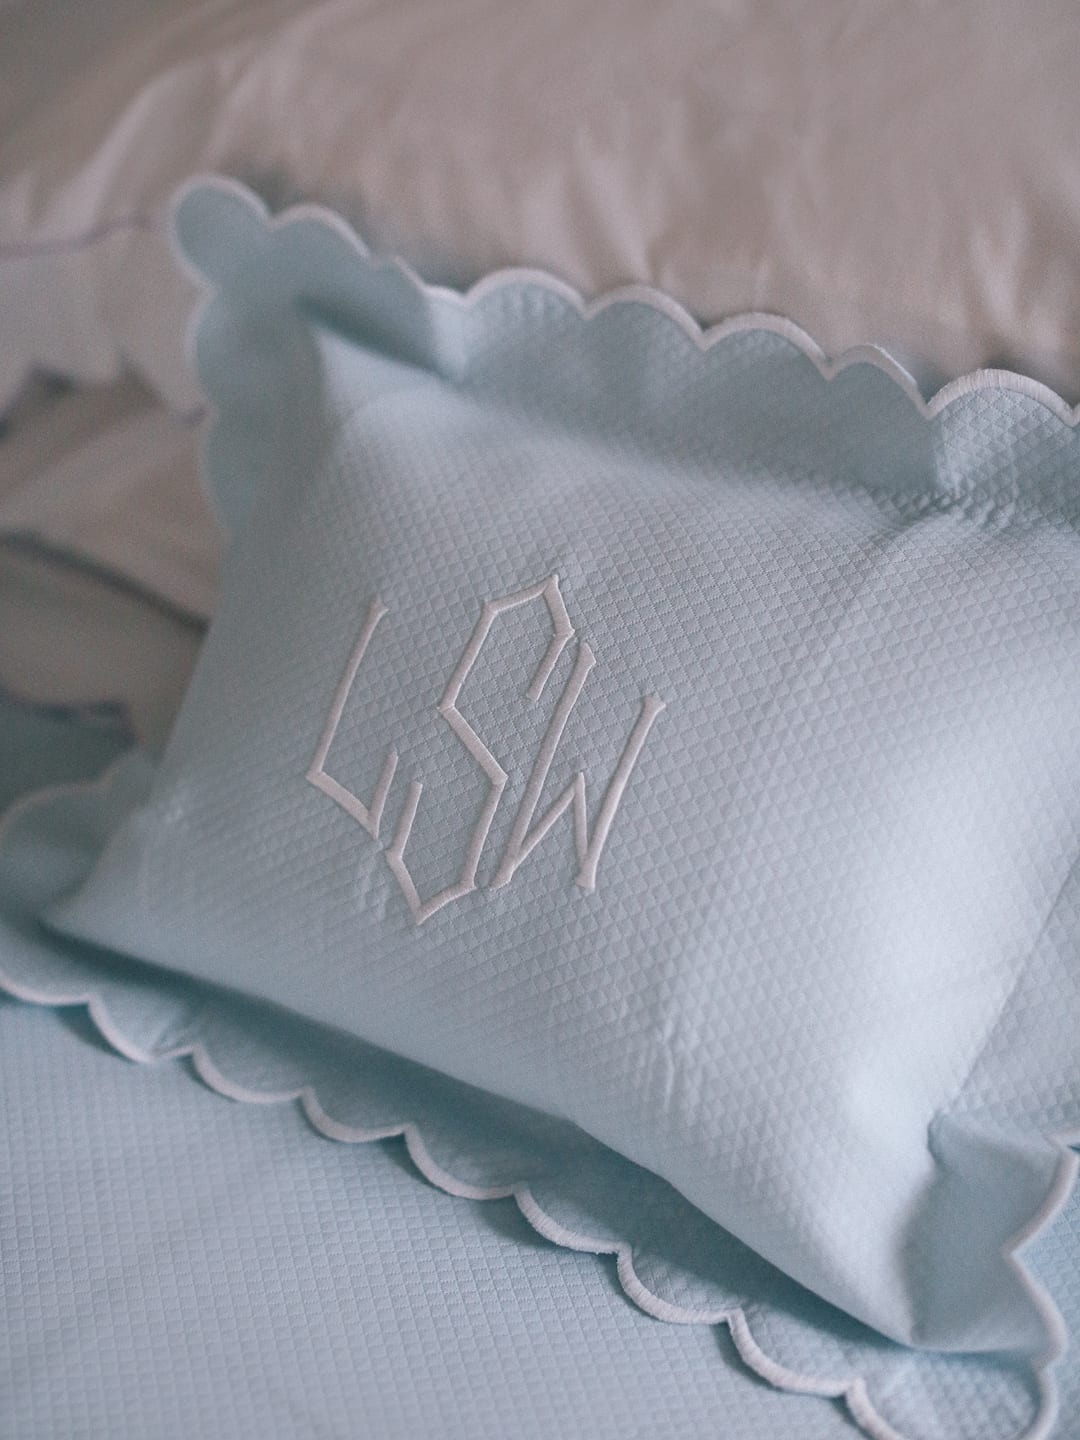 Dreamy Bedding with Matouk - A light blue, monogrammed pillow with scalloped edges